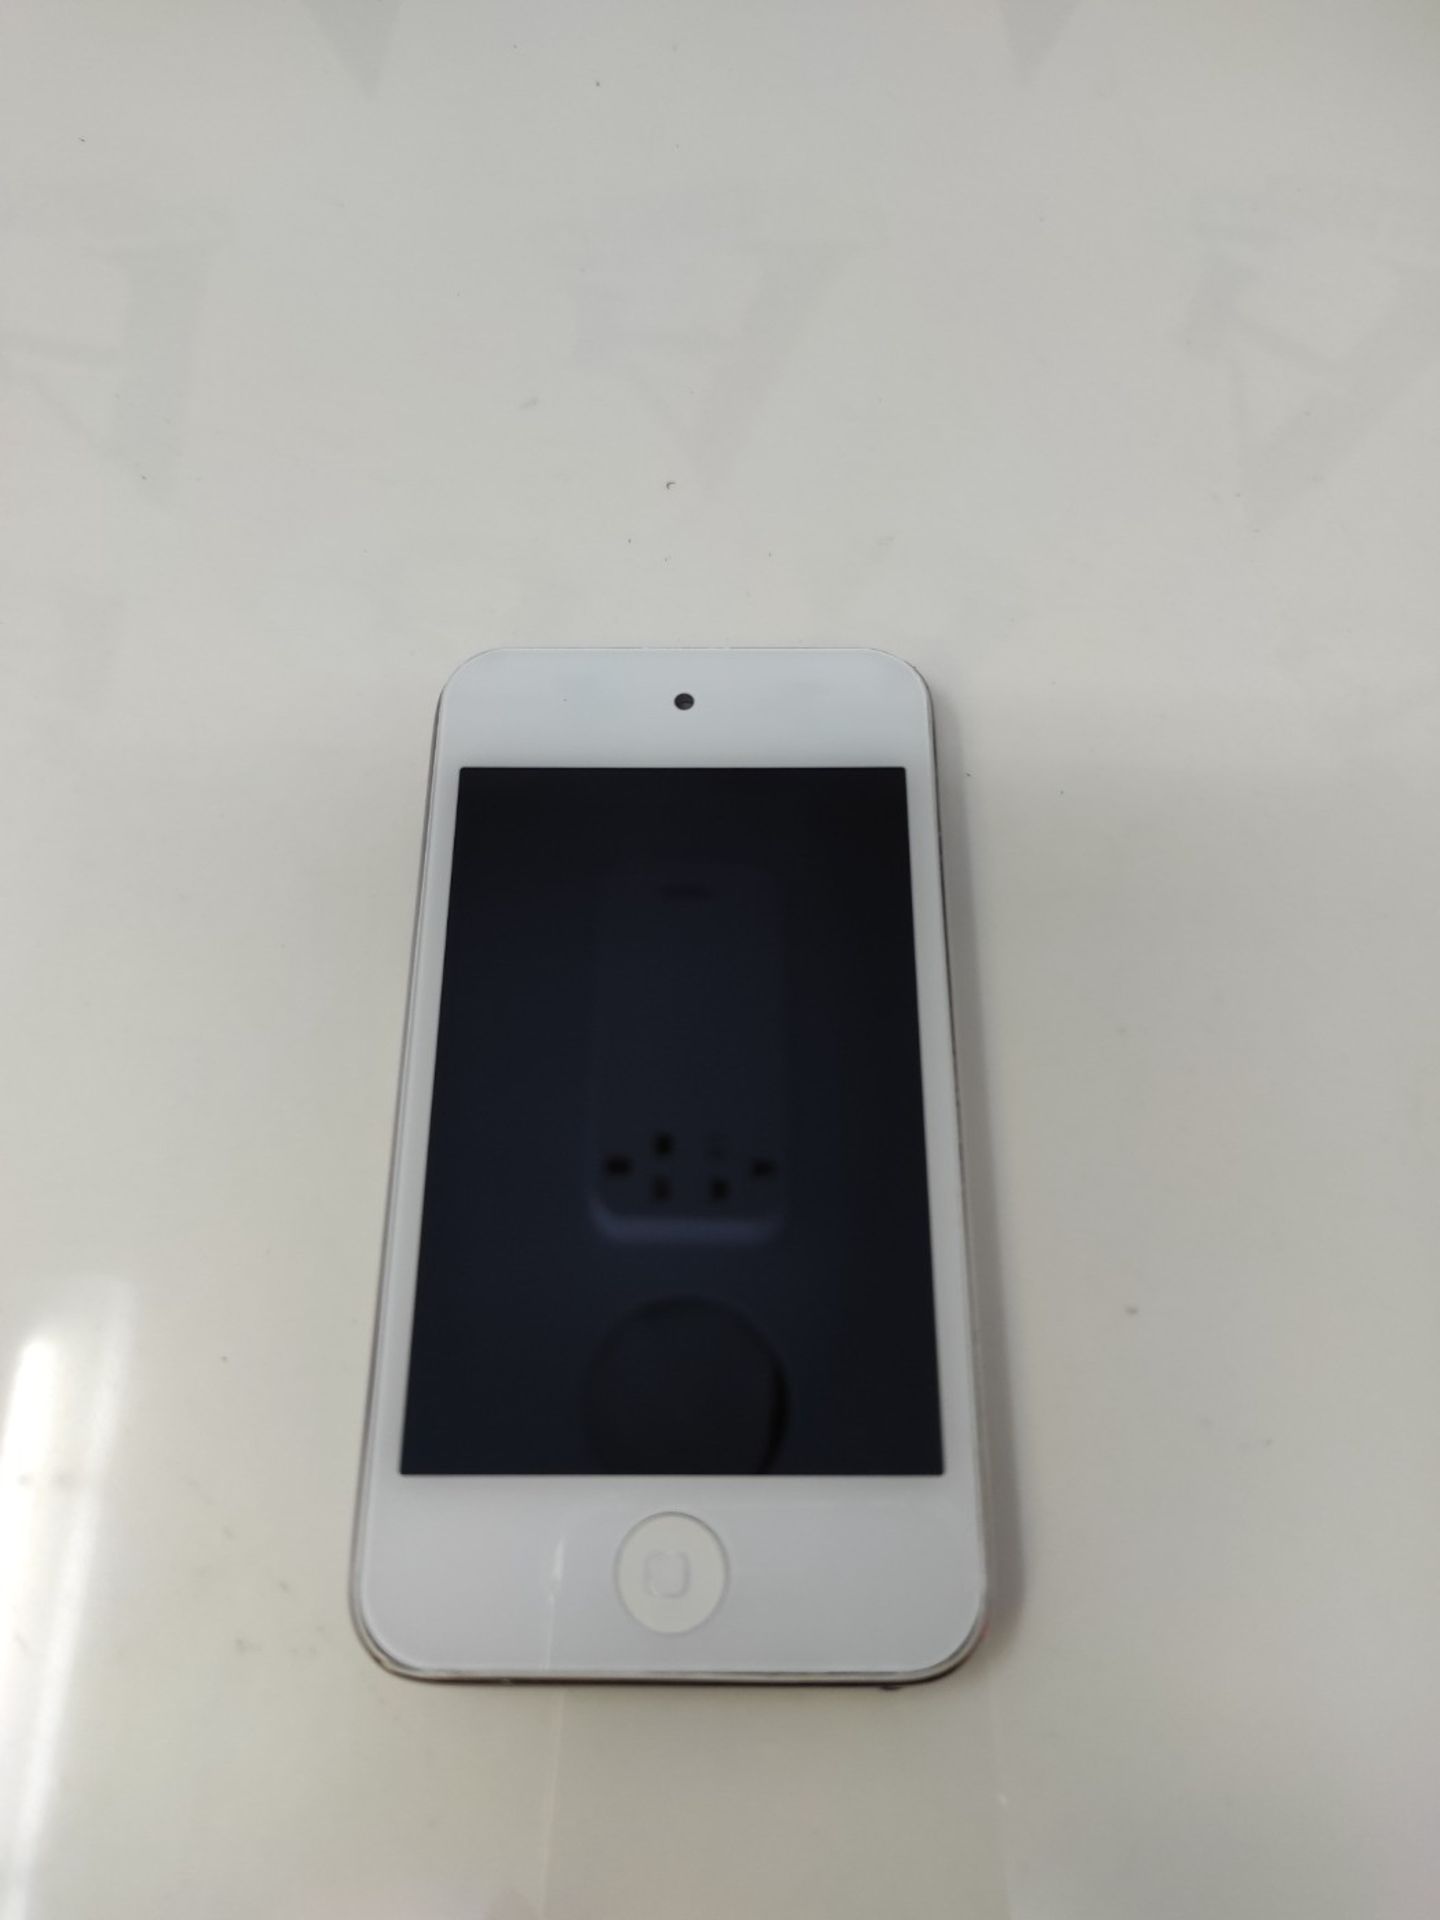 Apple iPod Touch 4G 16GB white - Image 2 of 2